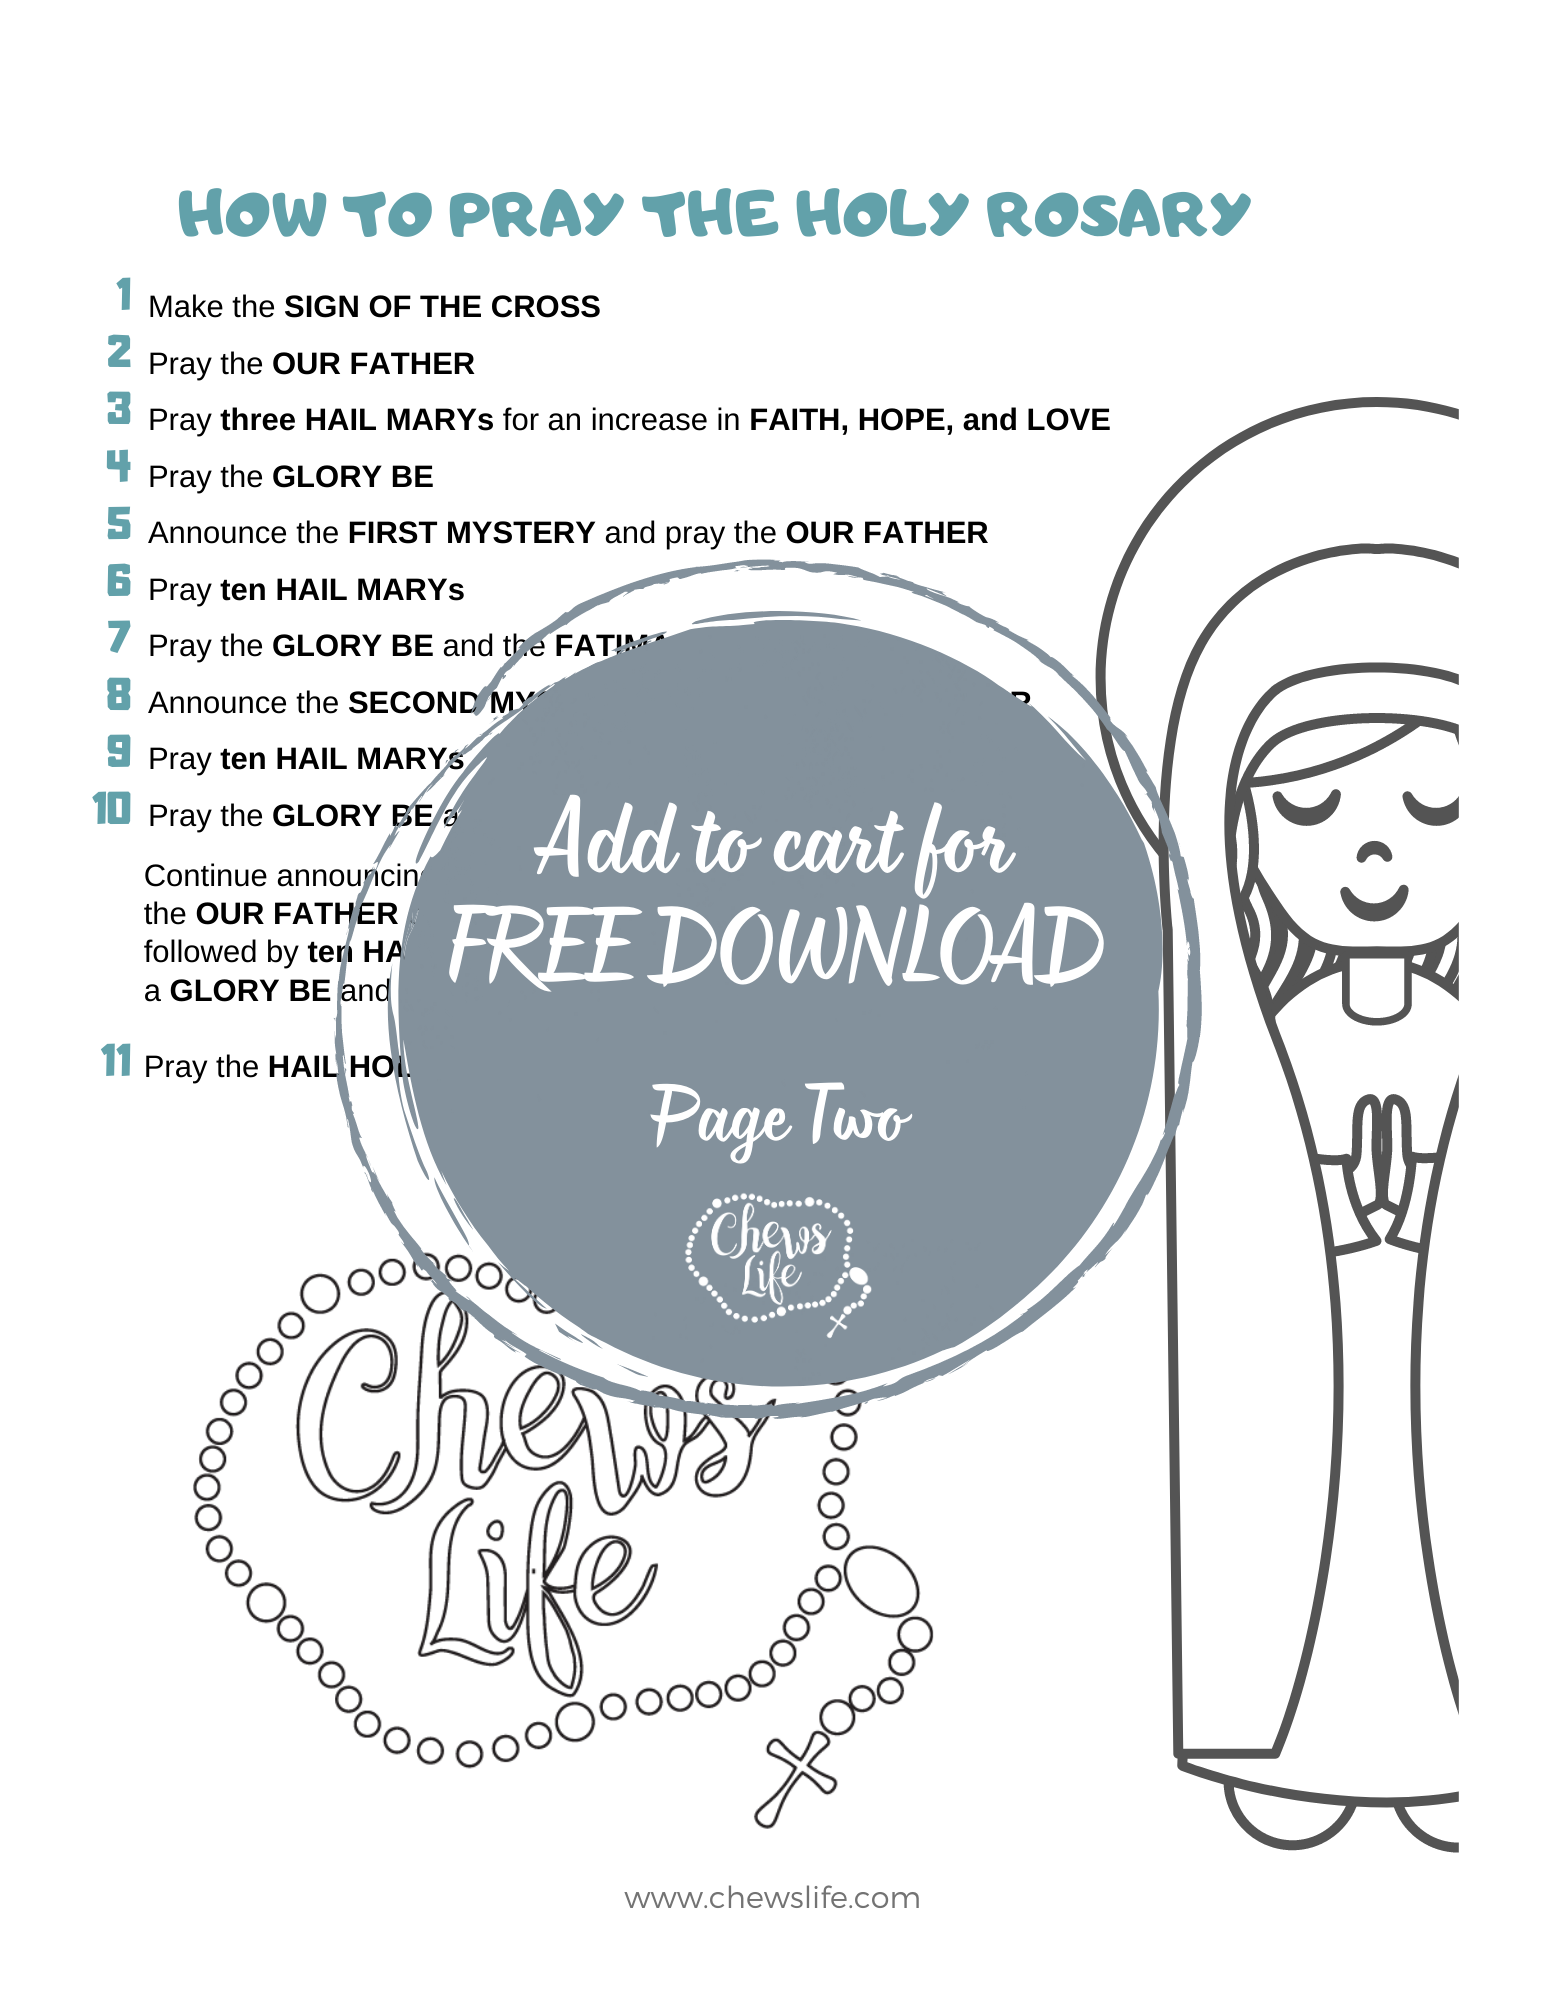 chews-life-coloring-pages-how-to-pray-the-rosary-31349552775344.png